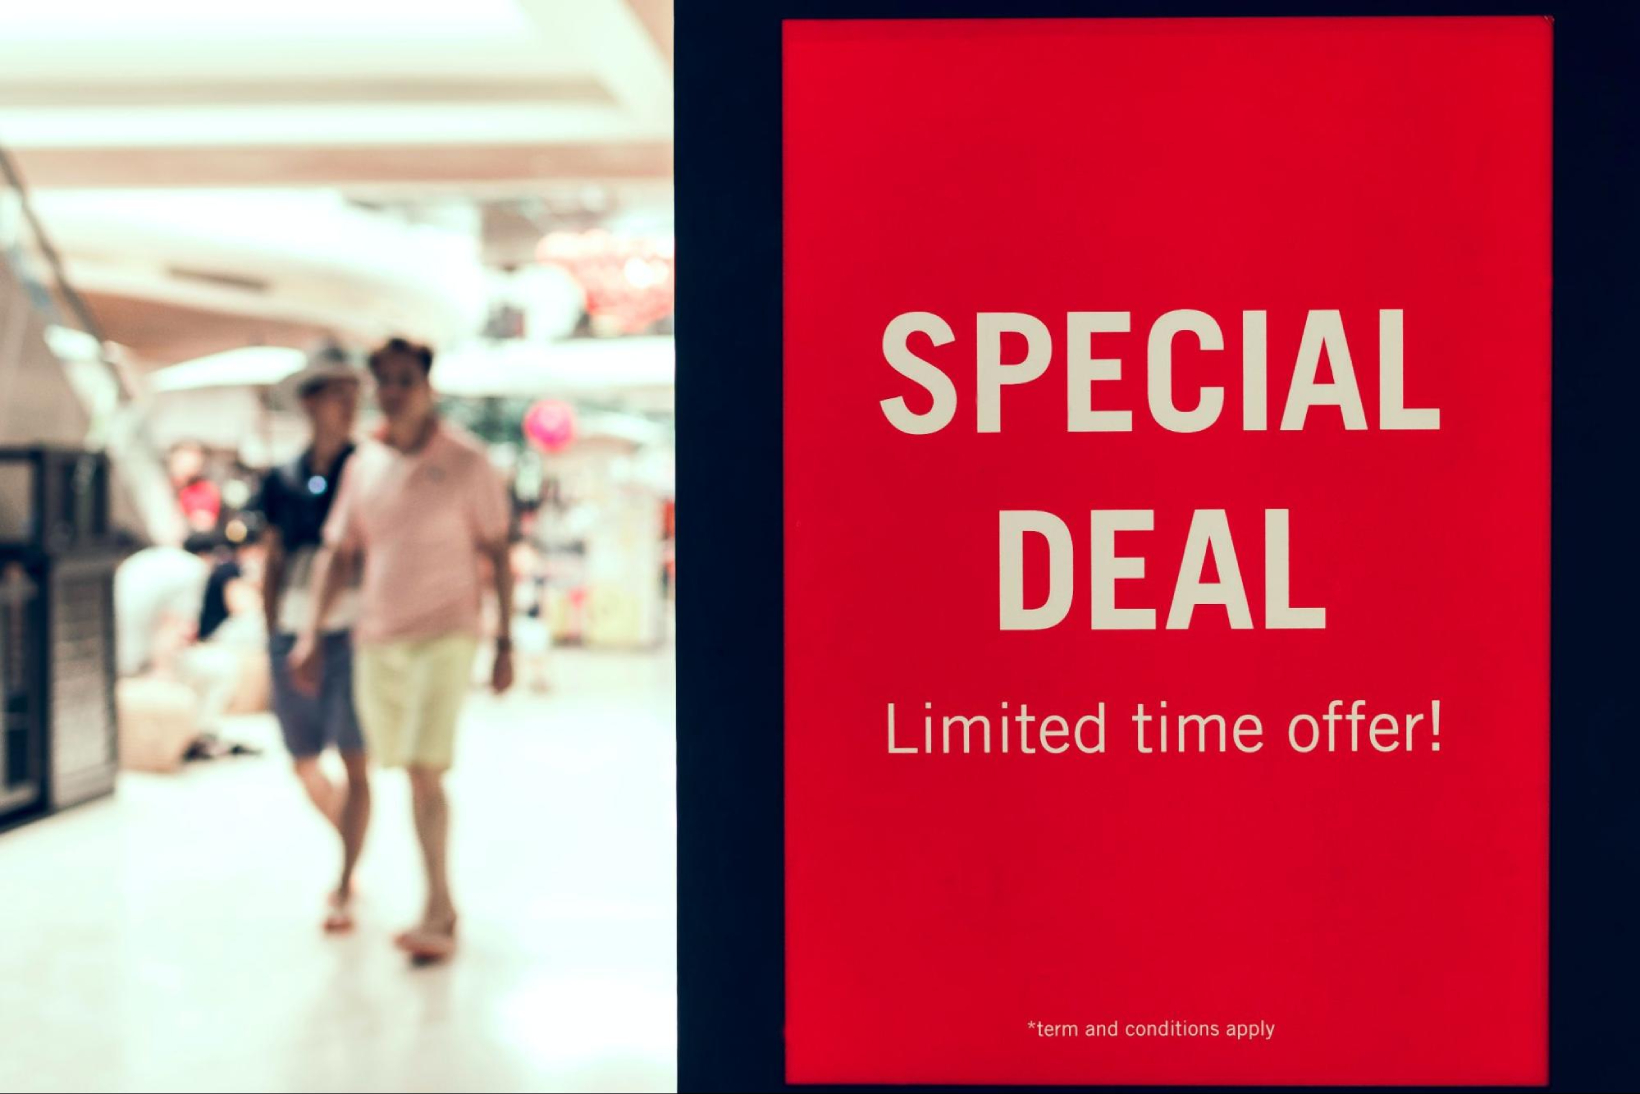 Limited-Time Offers: 10 Creative Ways to Drive More Online Sales